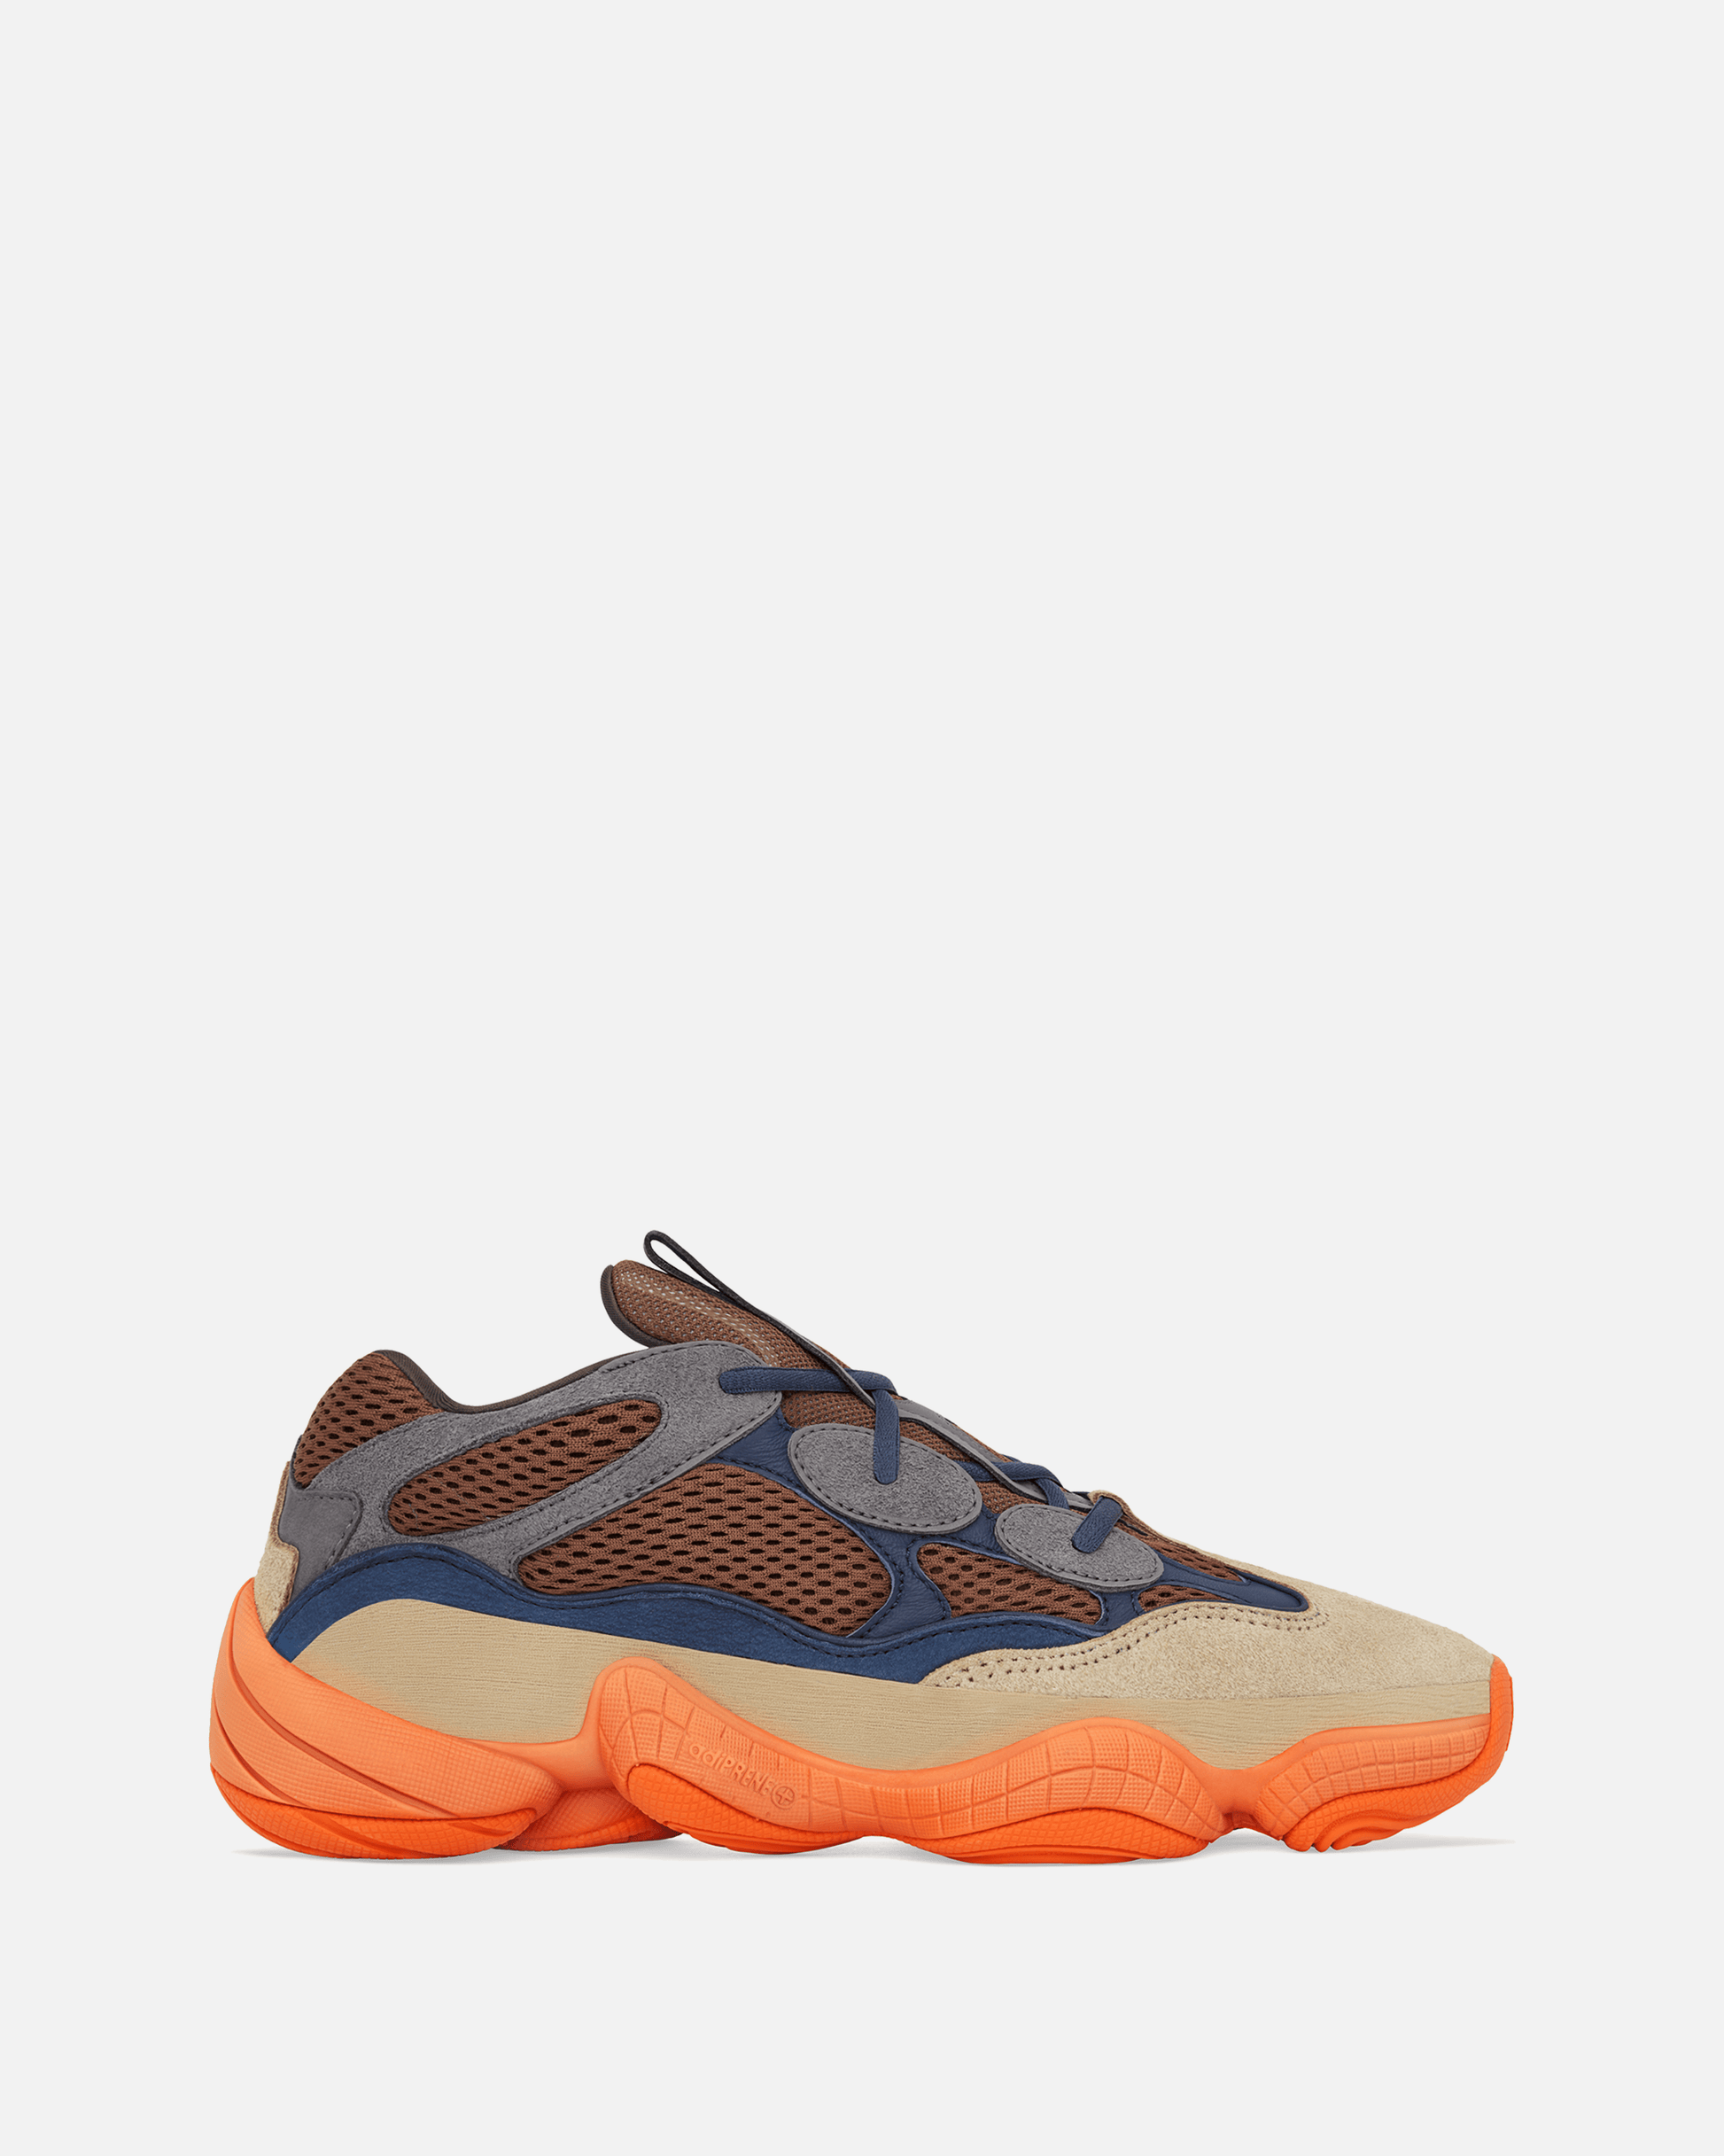 Adidas Releases Yeezy 500 'Enflame'